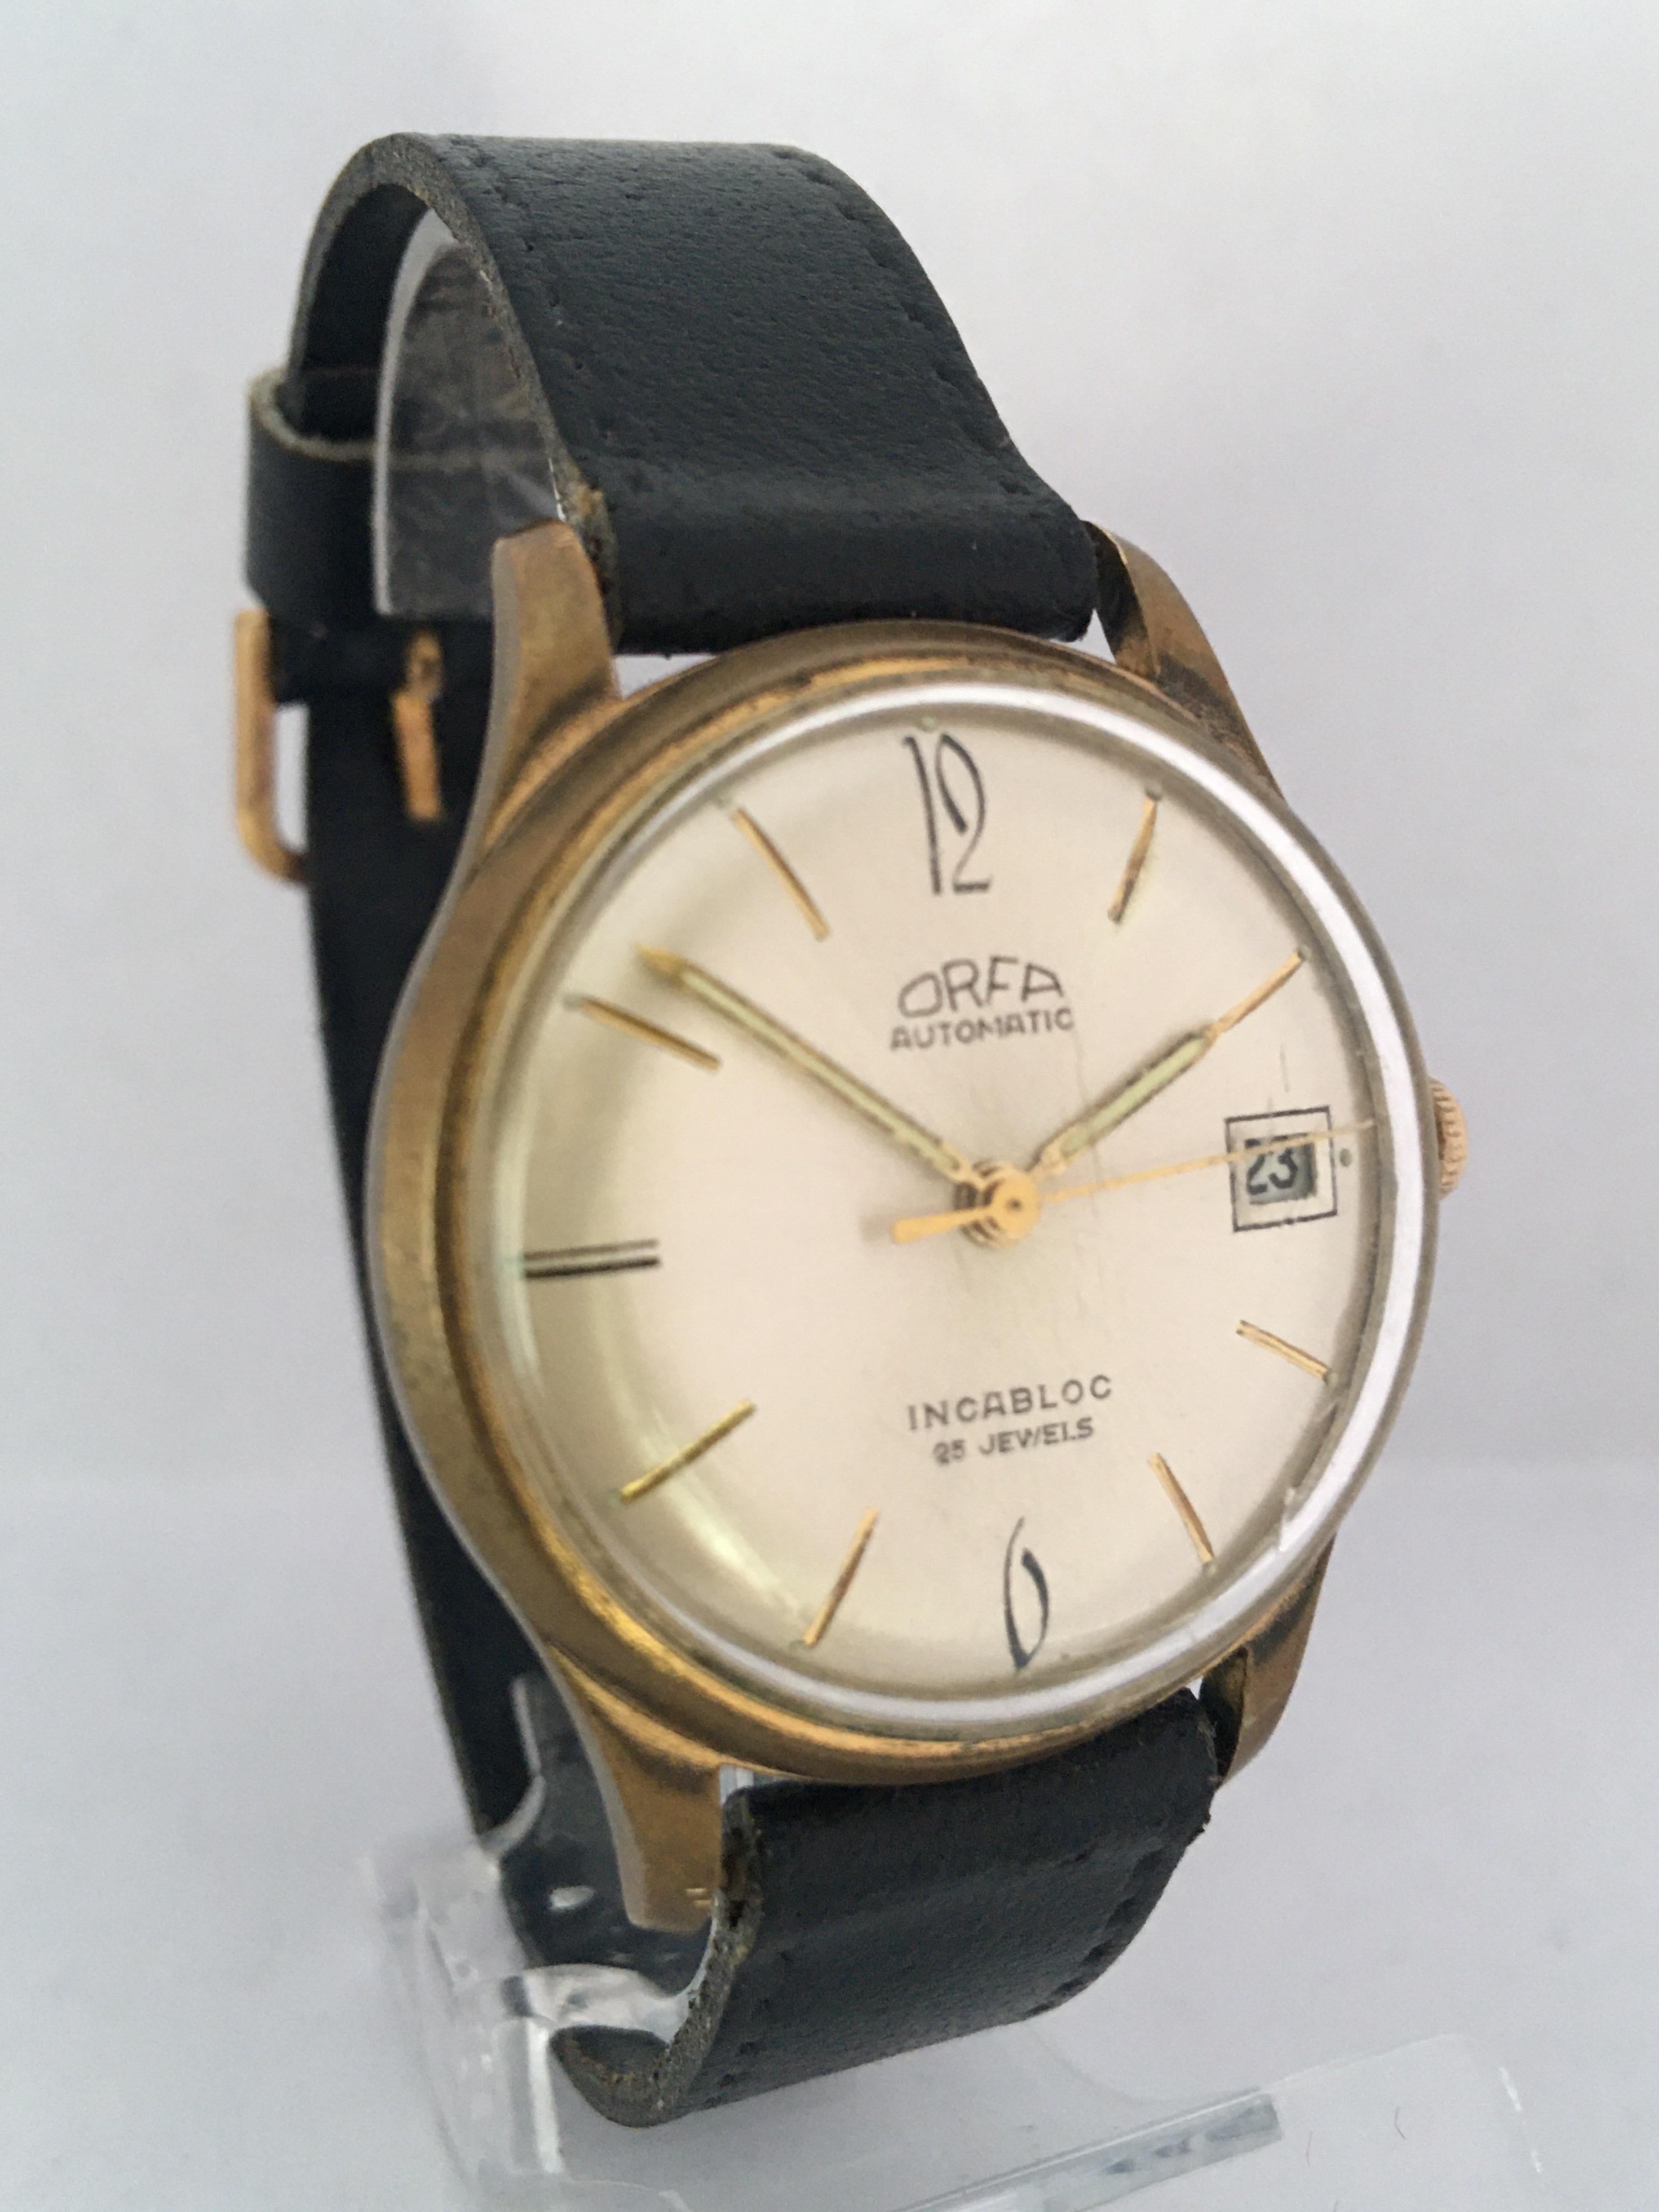 This beautiful vintage pre-owned automatic watch is in good working condition and it is running well (keeps a good time) visible signs of ageing and wear with visible scratches on the glass surface and on the watch case as shown. The watch bessel